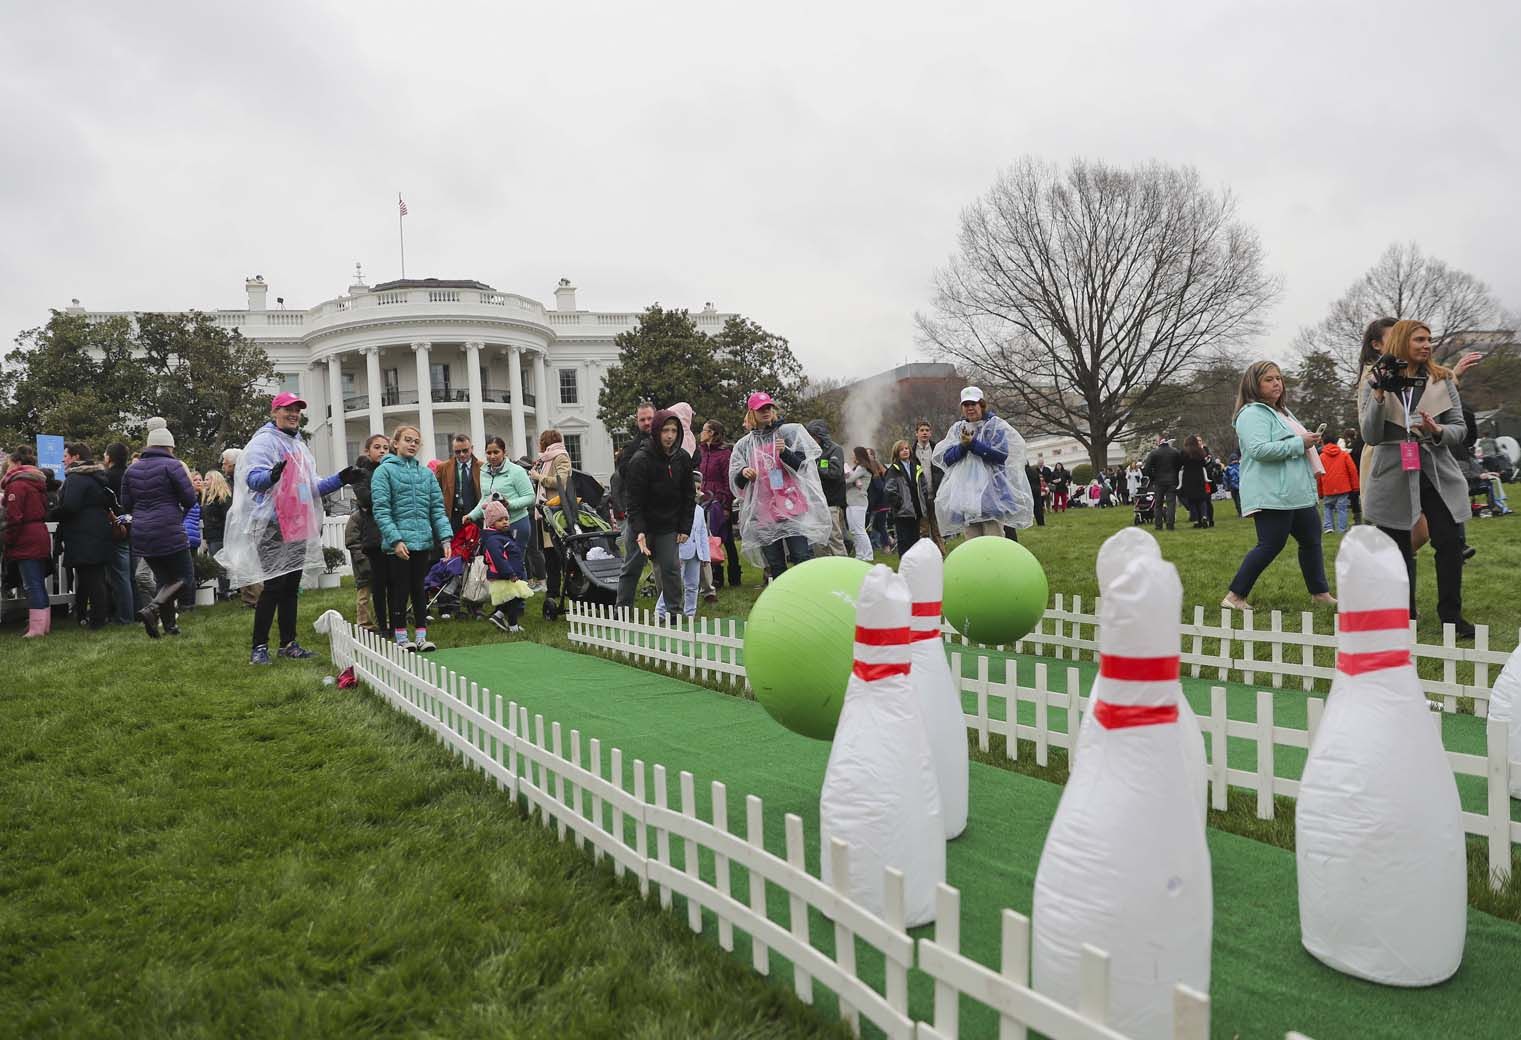 Guests participate in activities during the annual White House Easter Egg Roll on the South Lawn of the White House in Washington, Monday, April 2, 2018. (AP Photo/Pablo Martinez Monsivais)